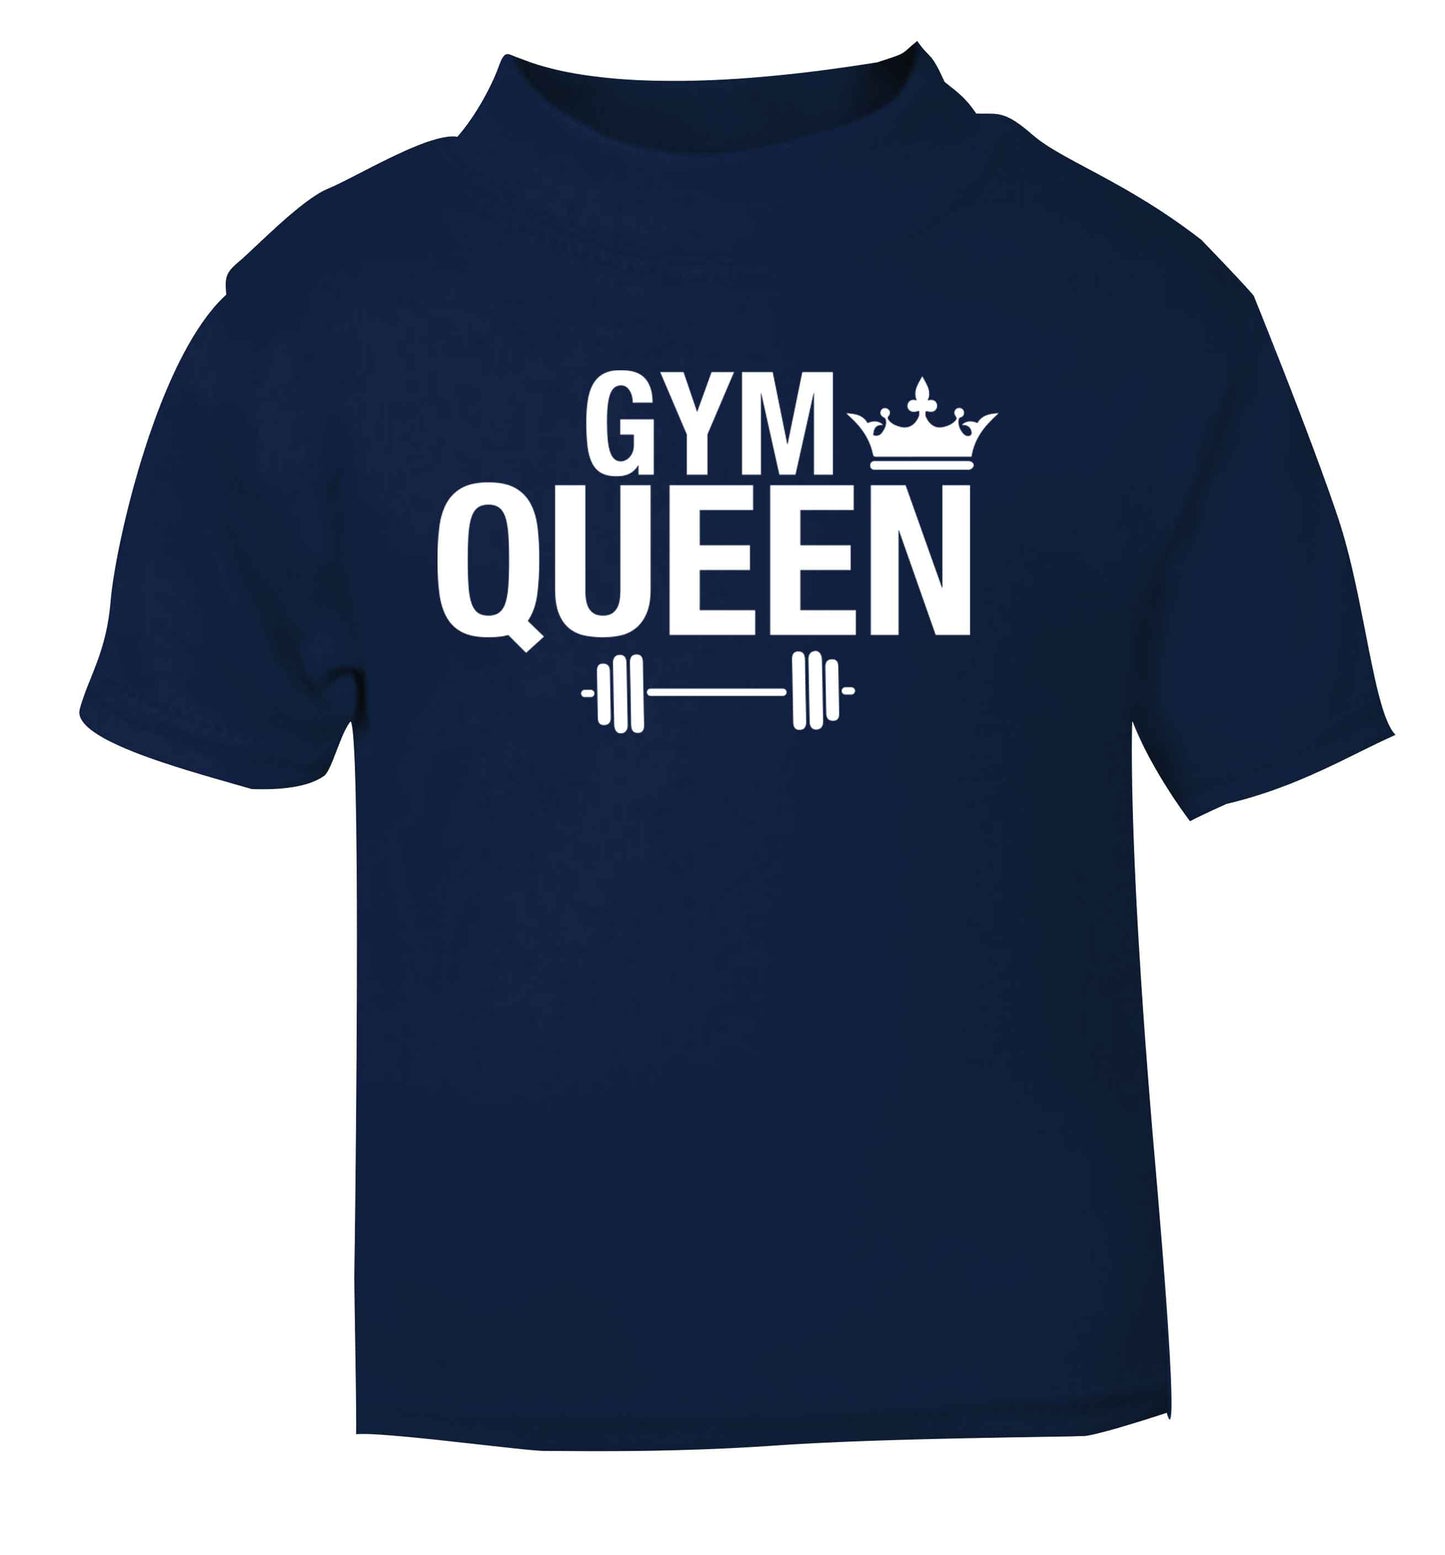 Gym queen navy Baby Toddler Tshirt 2 Years